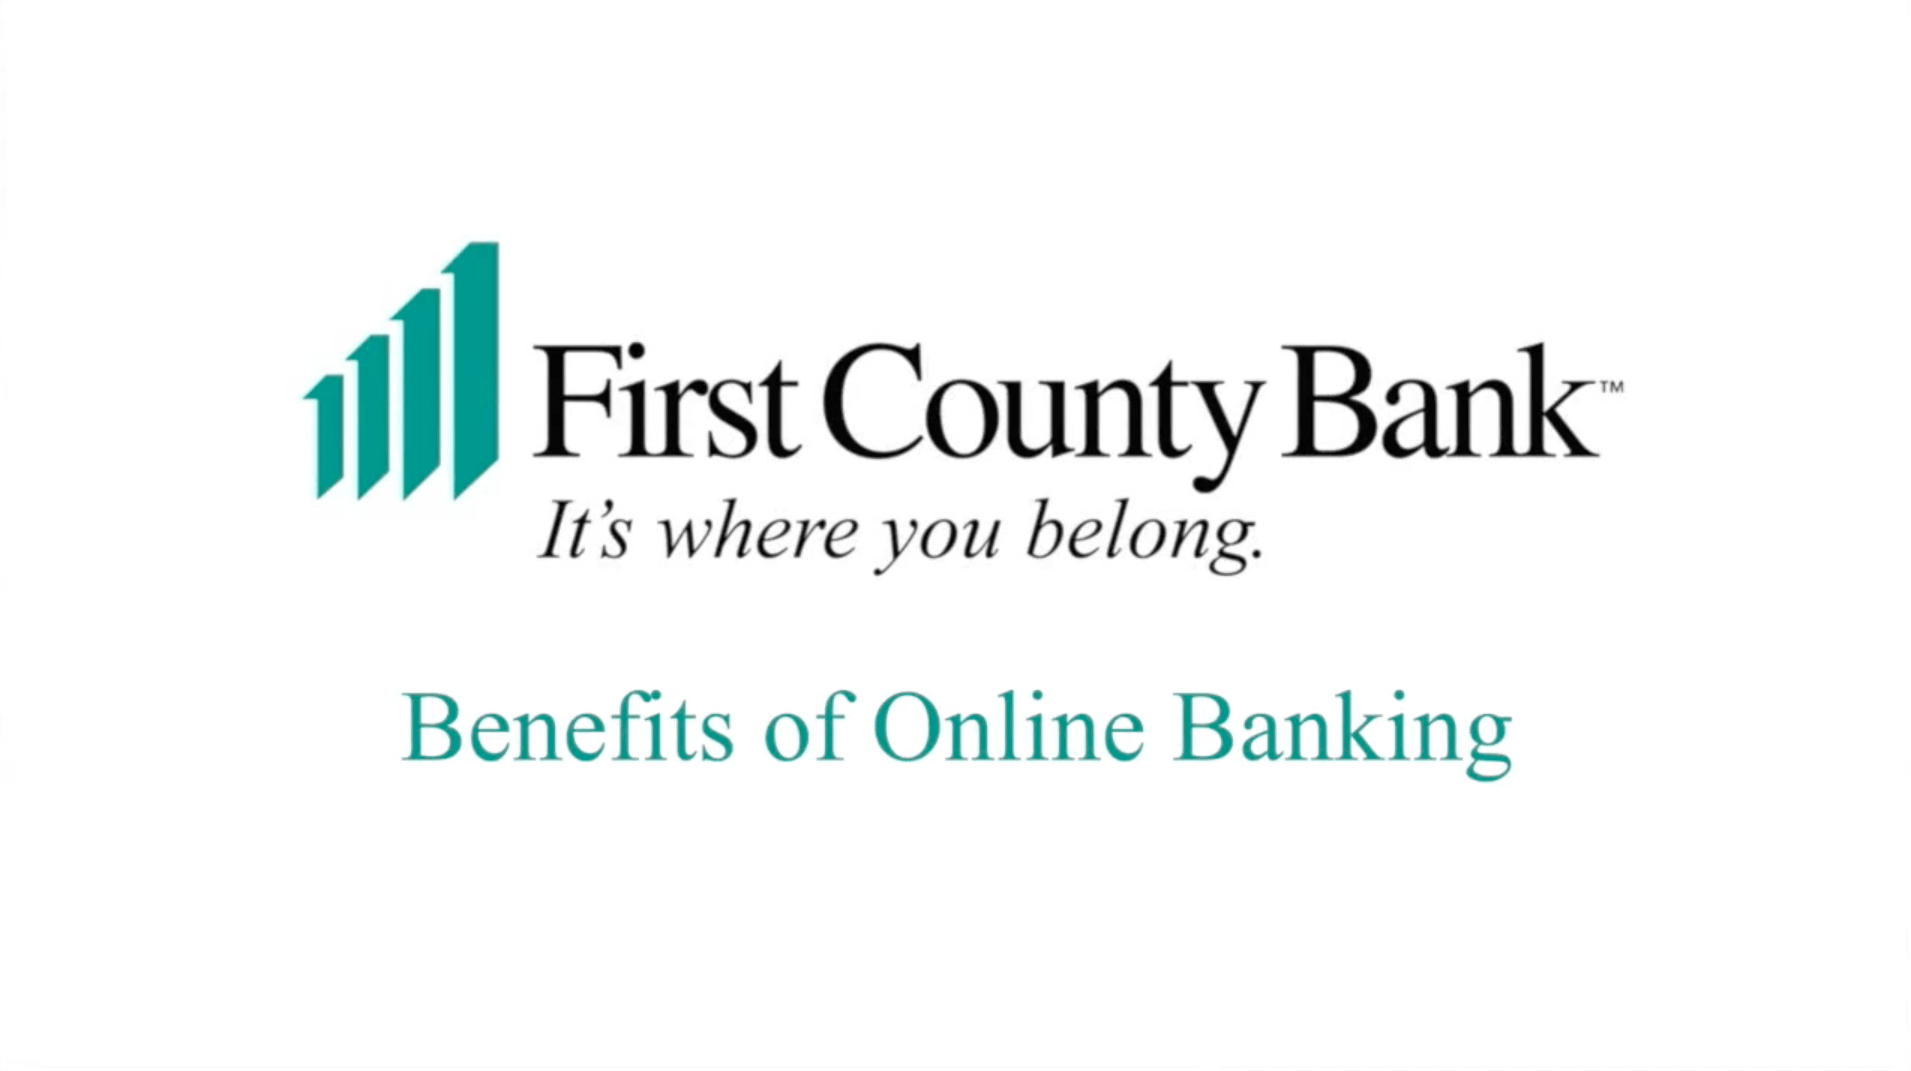 benefits of online banking at first county bank